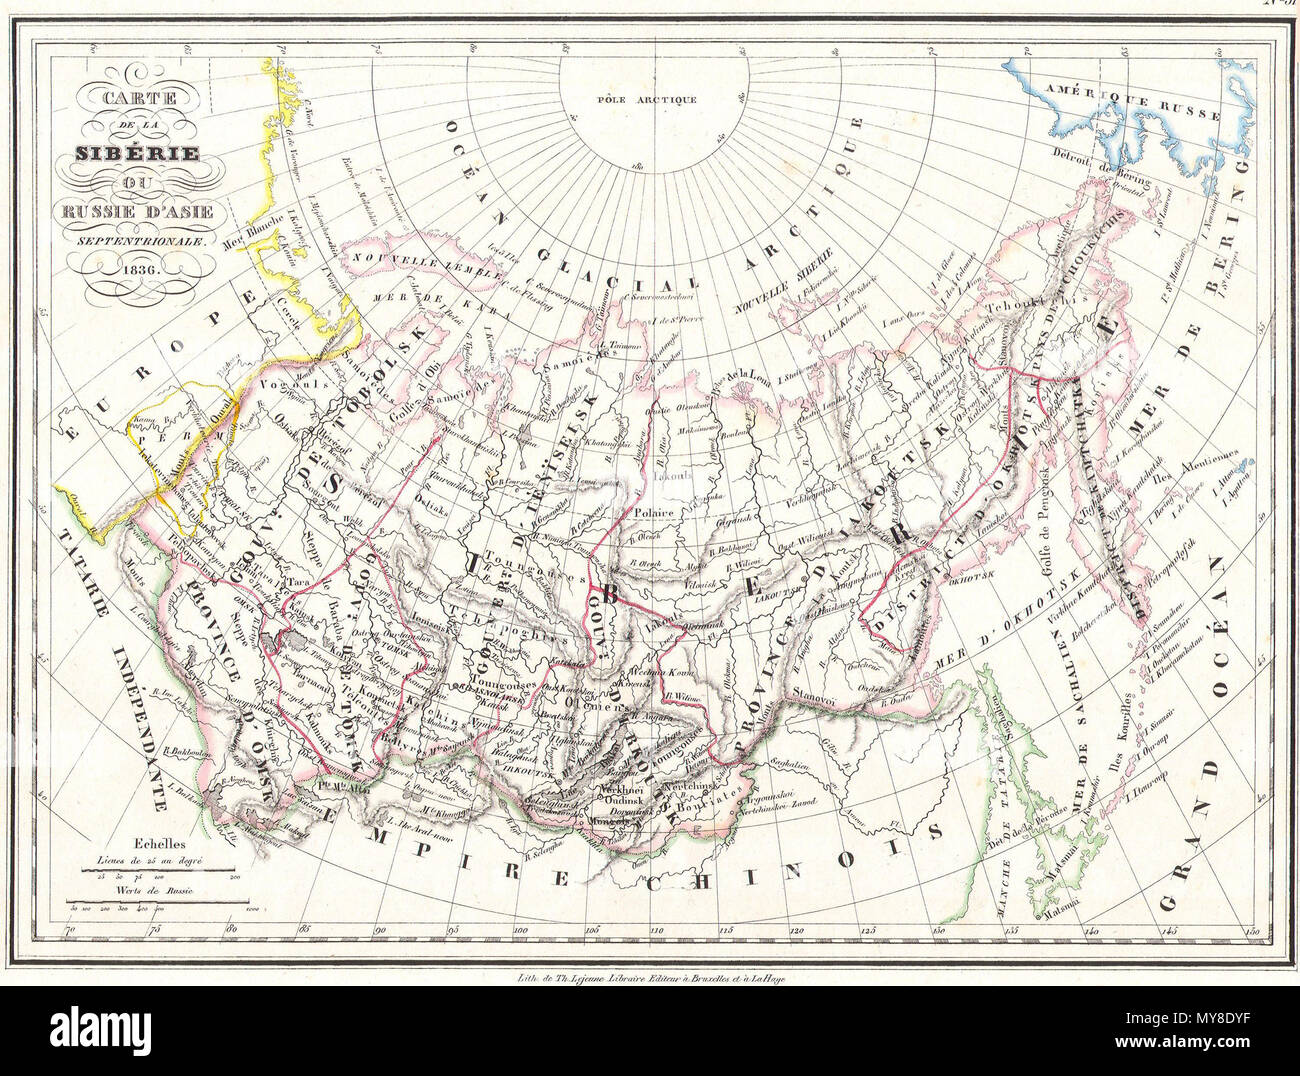 . Carte de la Siberie ou Russie d’Asie Septentrionale. 1836..  English: This unusual 1836 map by V. A. Malte-brun depicts Russia in Asia or Siberia. Depicts from the Ural mountains east as far as the Bering Strait and Alaska and as far south as the Chinese Empire. All text in French. . 1836 5 1836 Malte-brun Map of Russia in Asia and Siberia - Geographicus - Siberie-mb-1836 Stock Photo